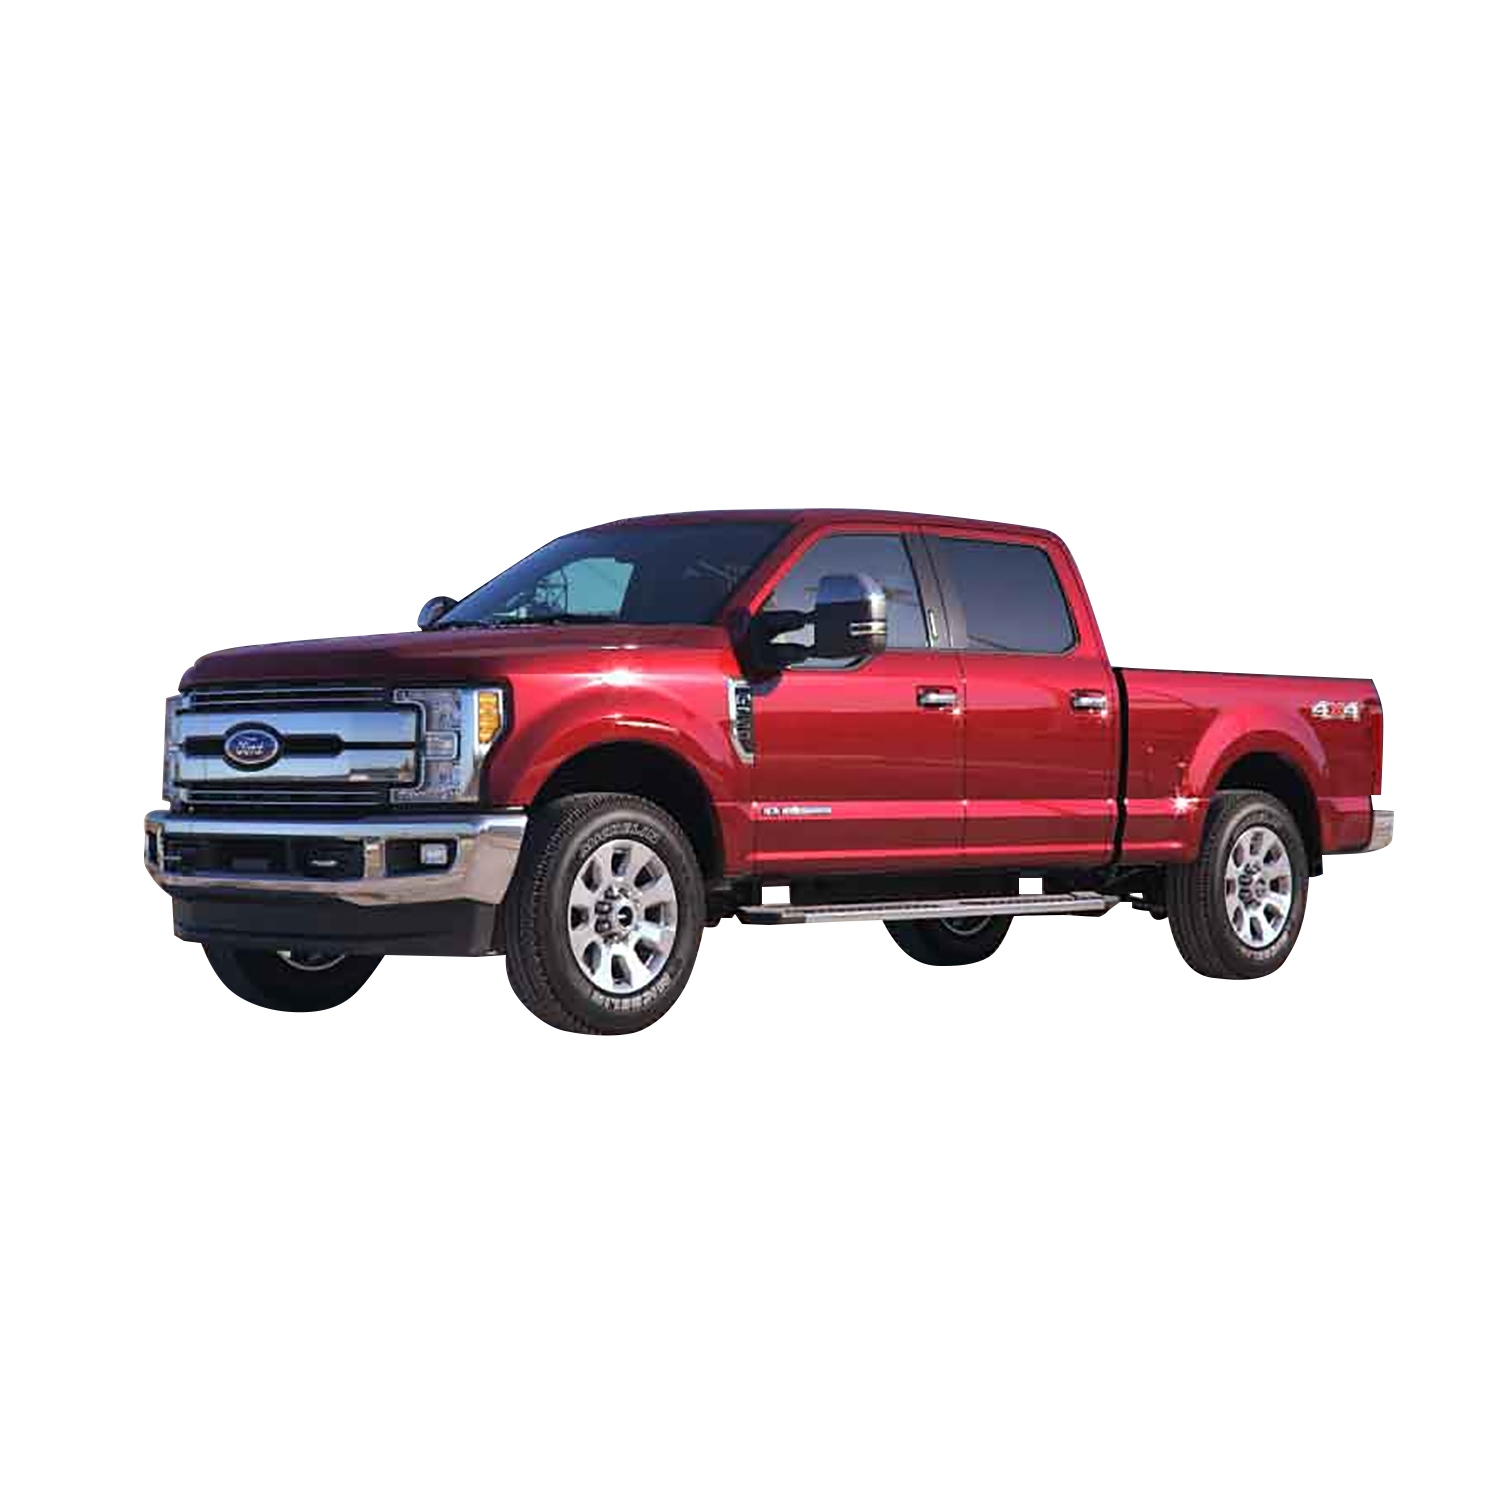 Ford Ruby Red Metallic Paint Code 